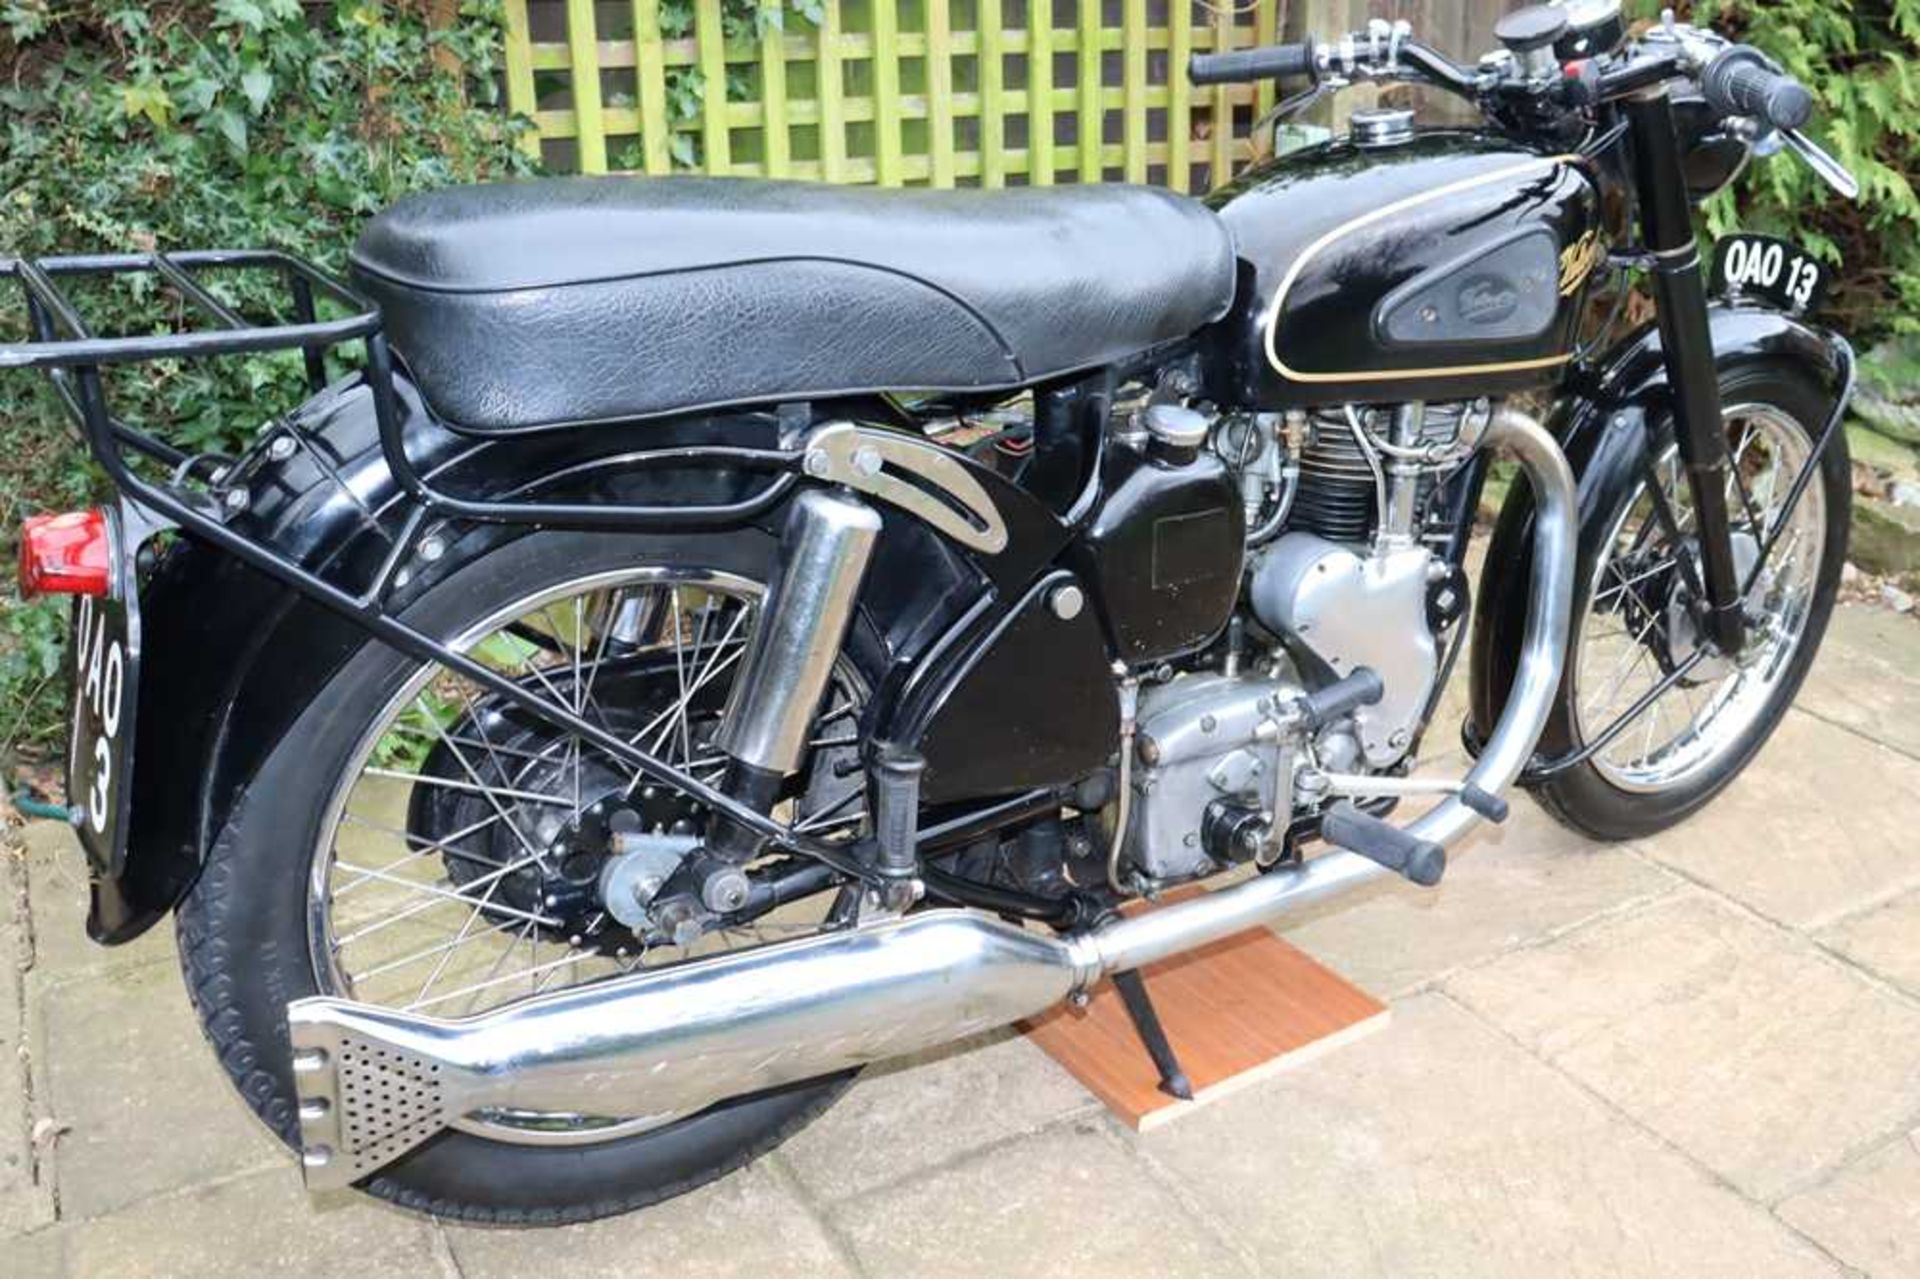 1954 Velocette MSS Fitted with an Alton electric starter kit - Image 3 of 41